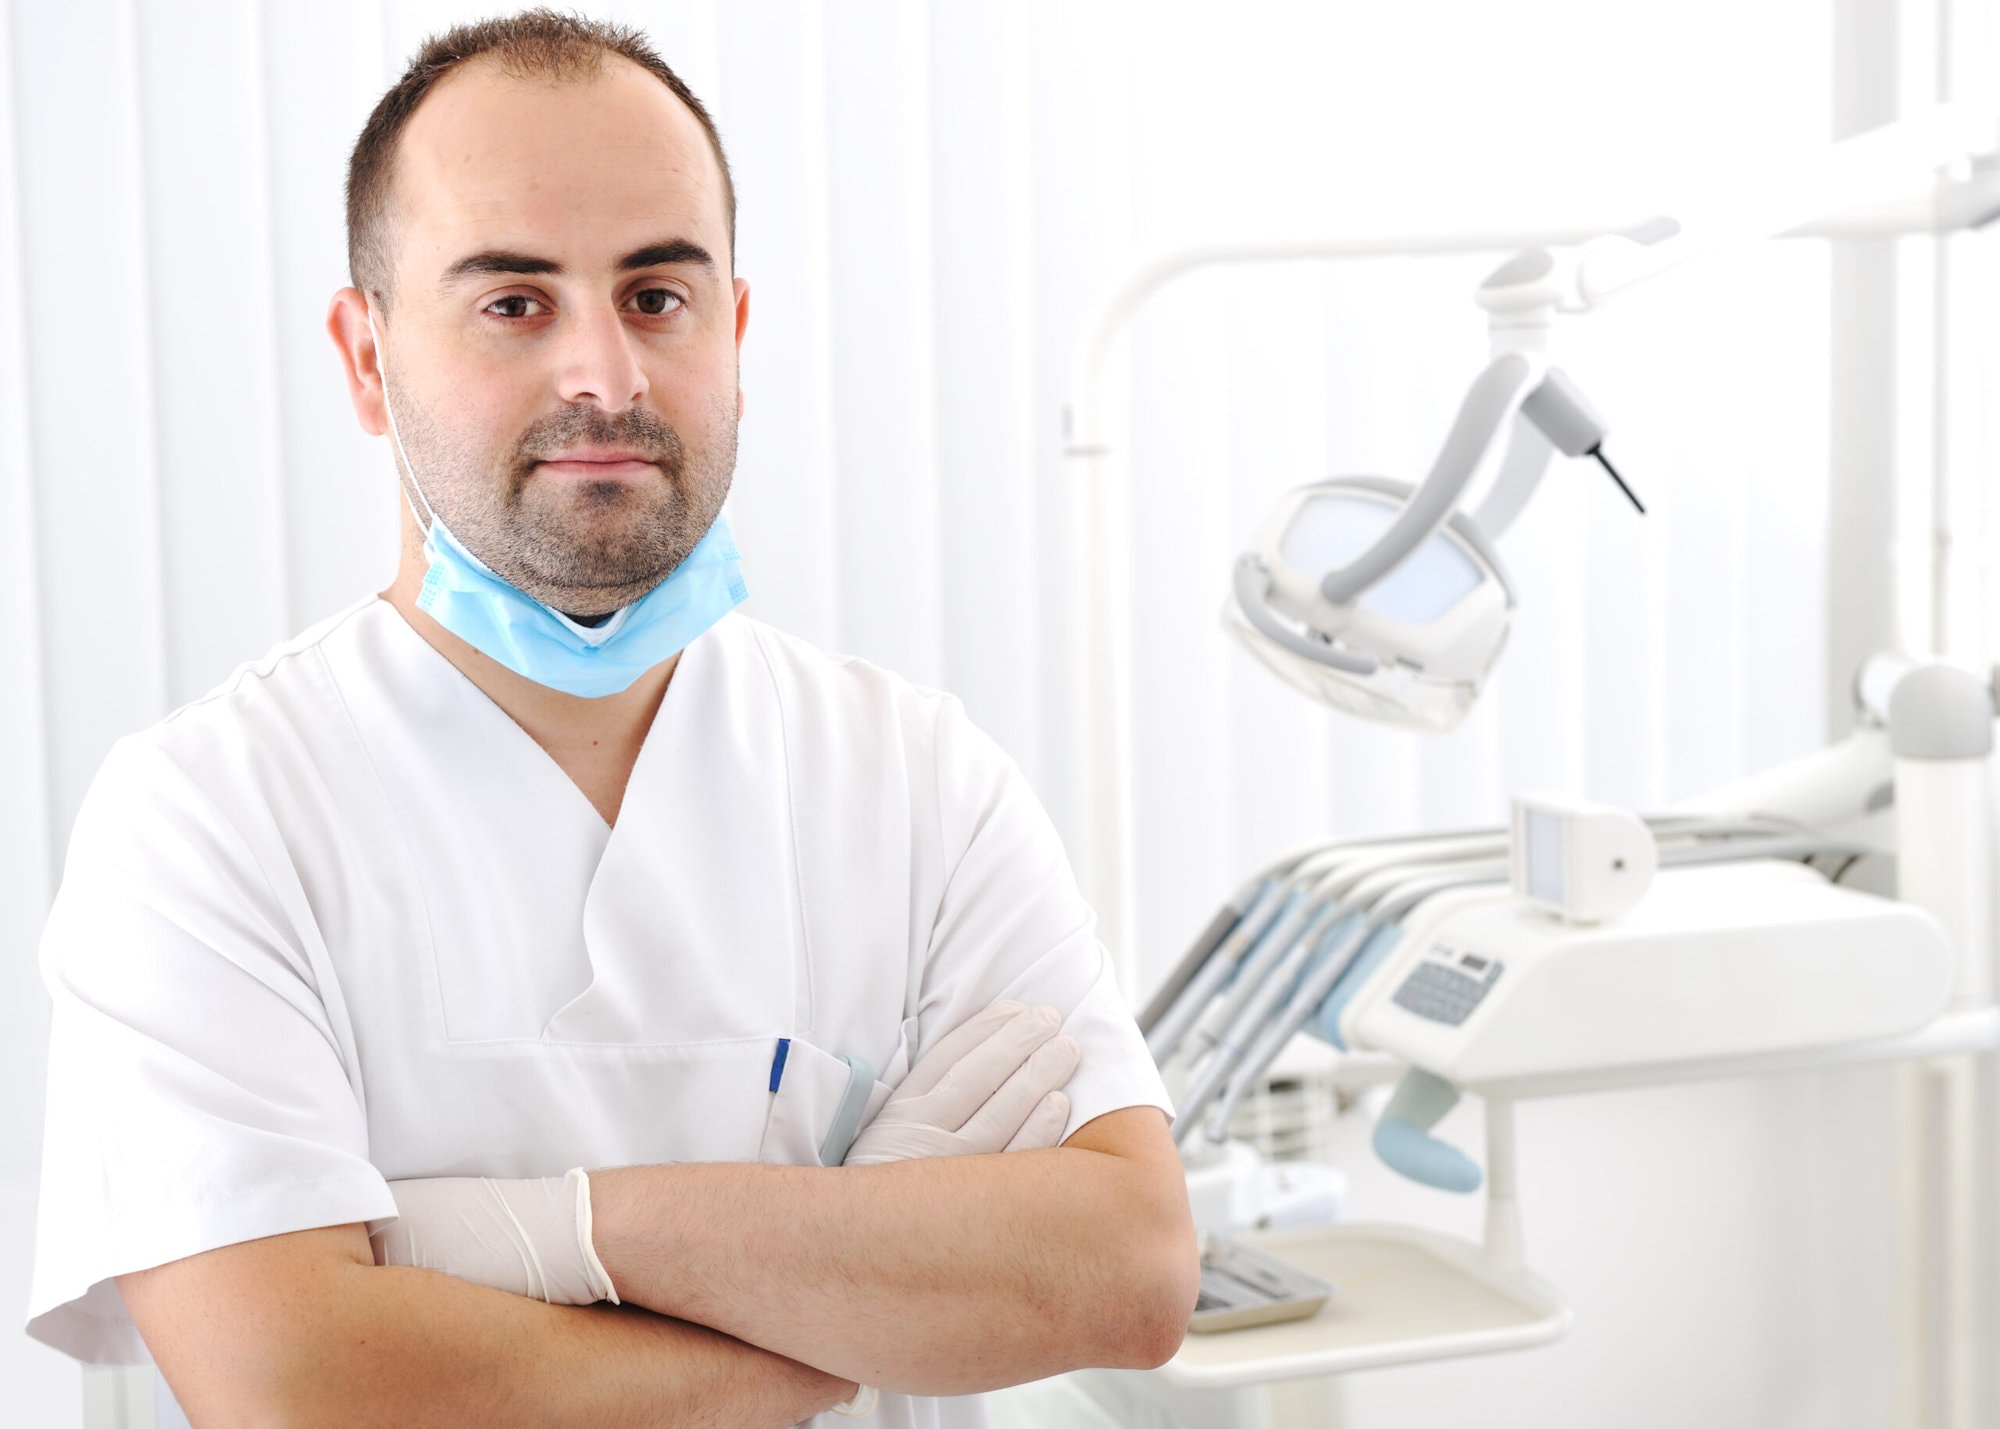 buying a dental practice